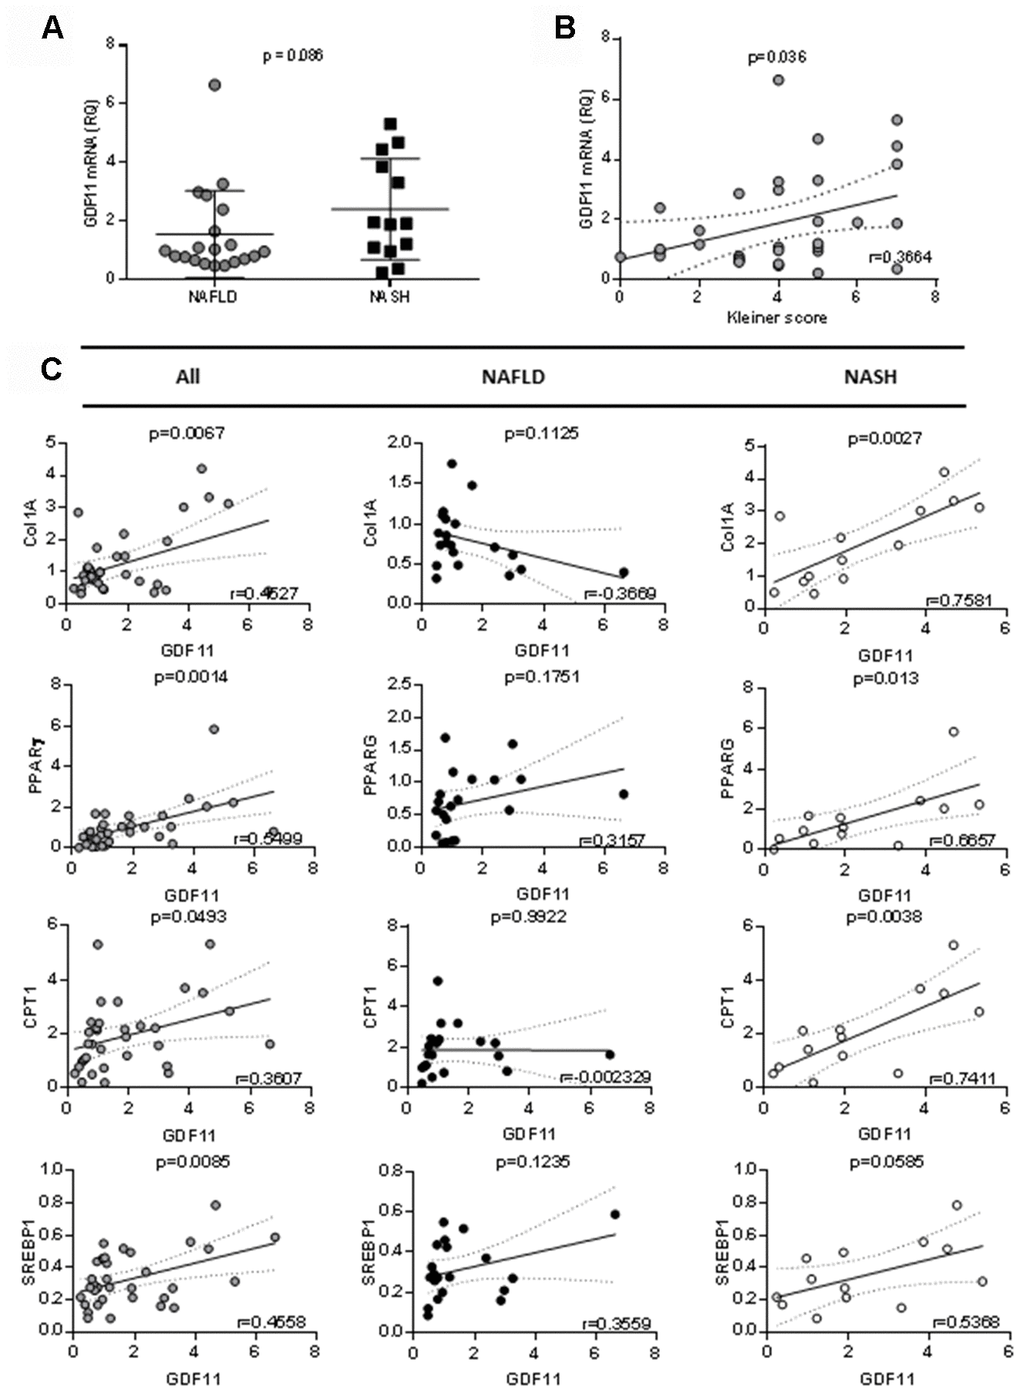 Correlation between GDF11 mRNA levels, clinico-pathologic characteristics and gene expression in morbidly obese patients (n=33). Correlations between GDF11 mRNA levels and (A) NAFLD or NASH, (B) Kleiner score (0-8) and (C) expression levels of Col1A1, SREBP1, PPARγ and CPT1 in the whole cohort of morbidly obese patients (n=33) and subgroups with NAFLD (n=20) or NASH (n=13). The Pearson correlation’s coefficient is shown.